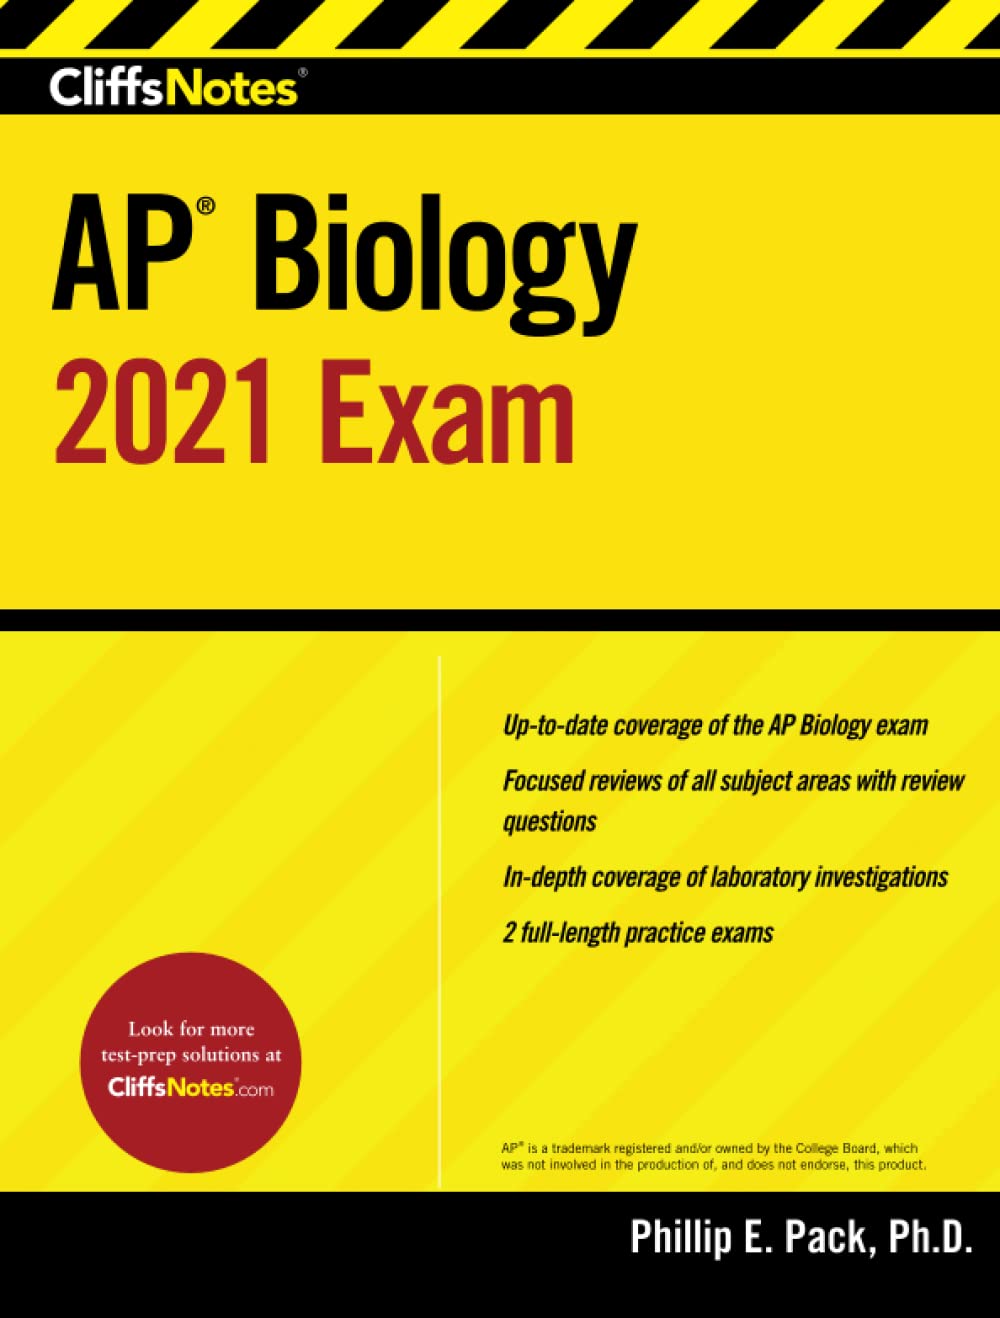 Advanced Placement Book Reviews for College Applicants